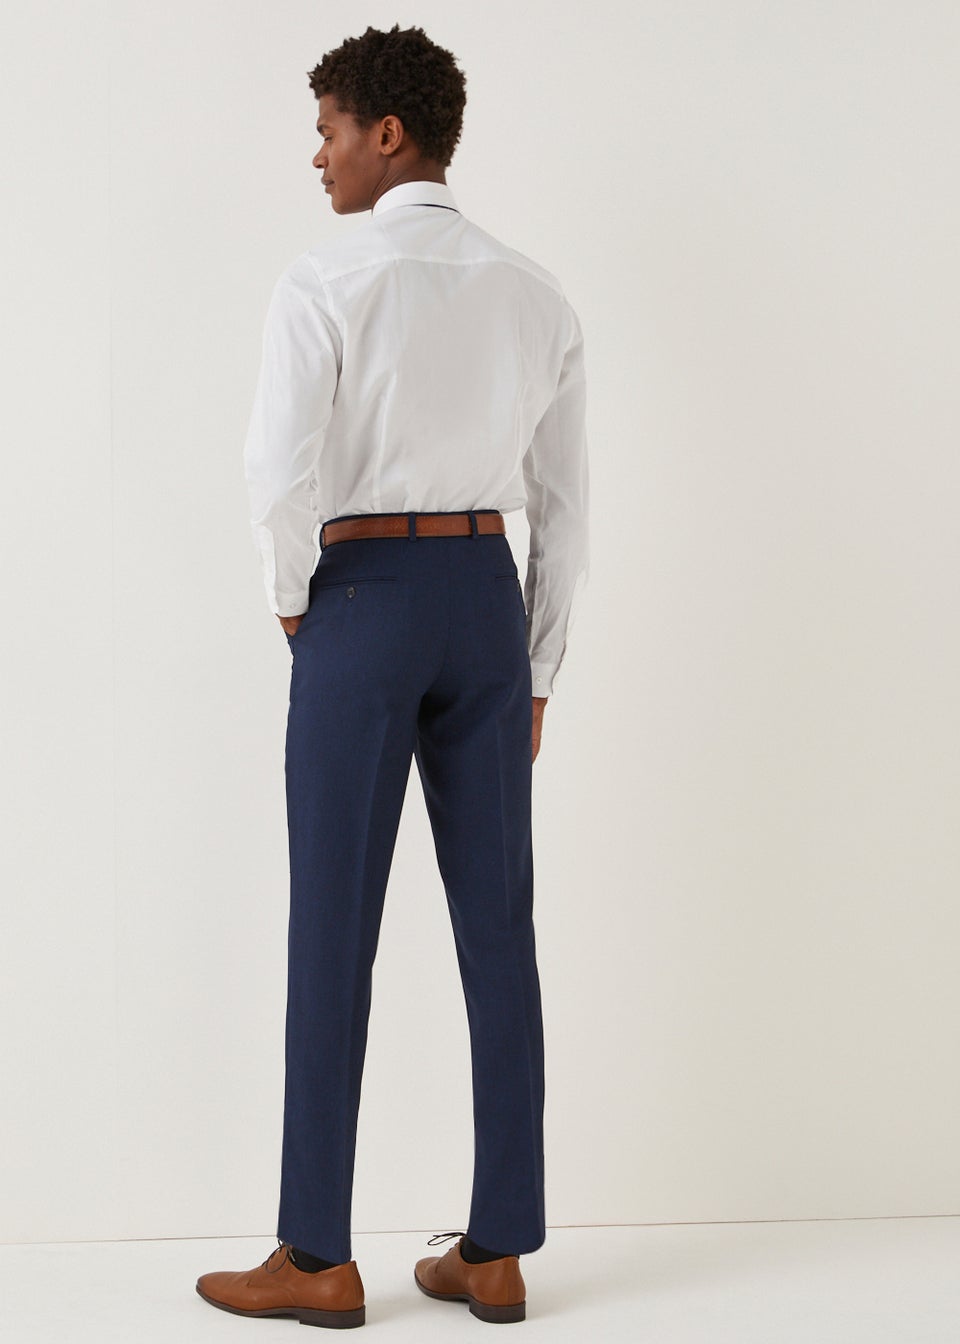 Taylor & Wright Bristol Navy Slim Fit Suit Trousers